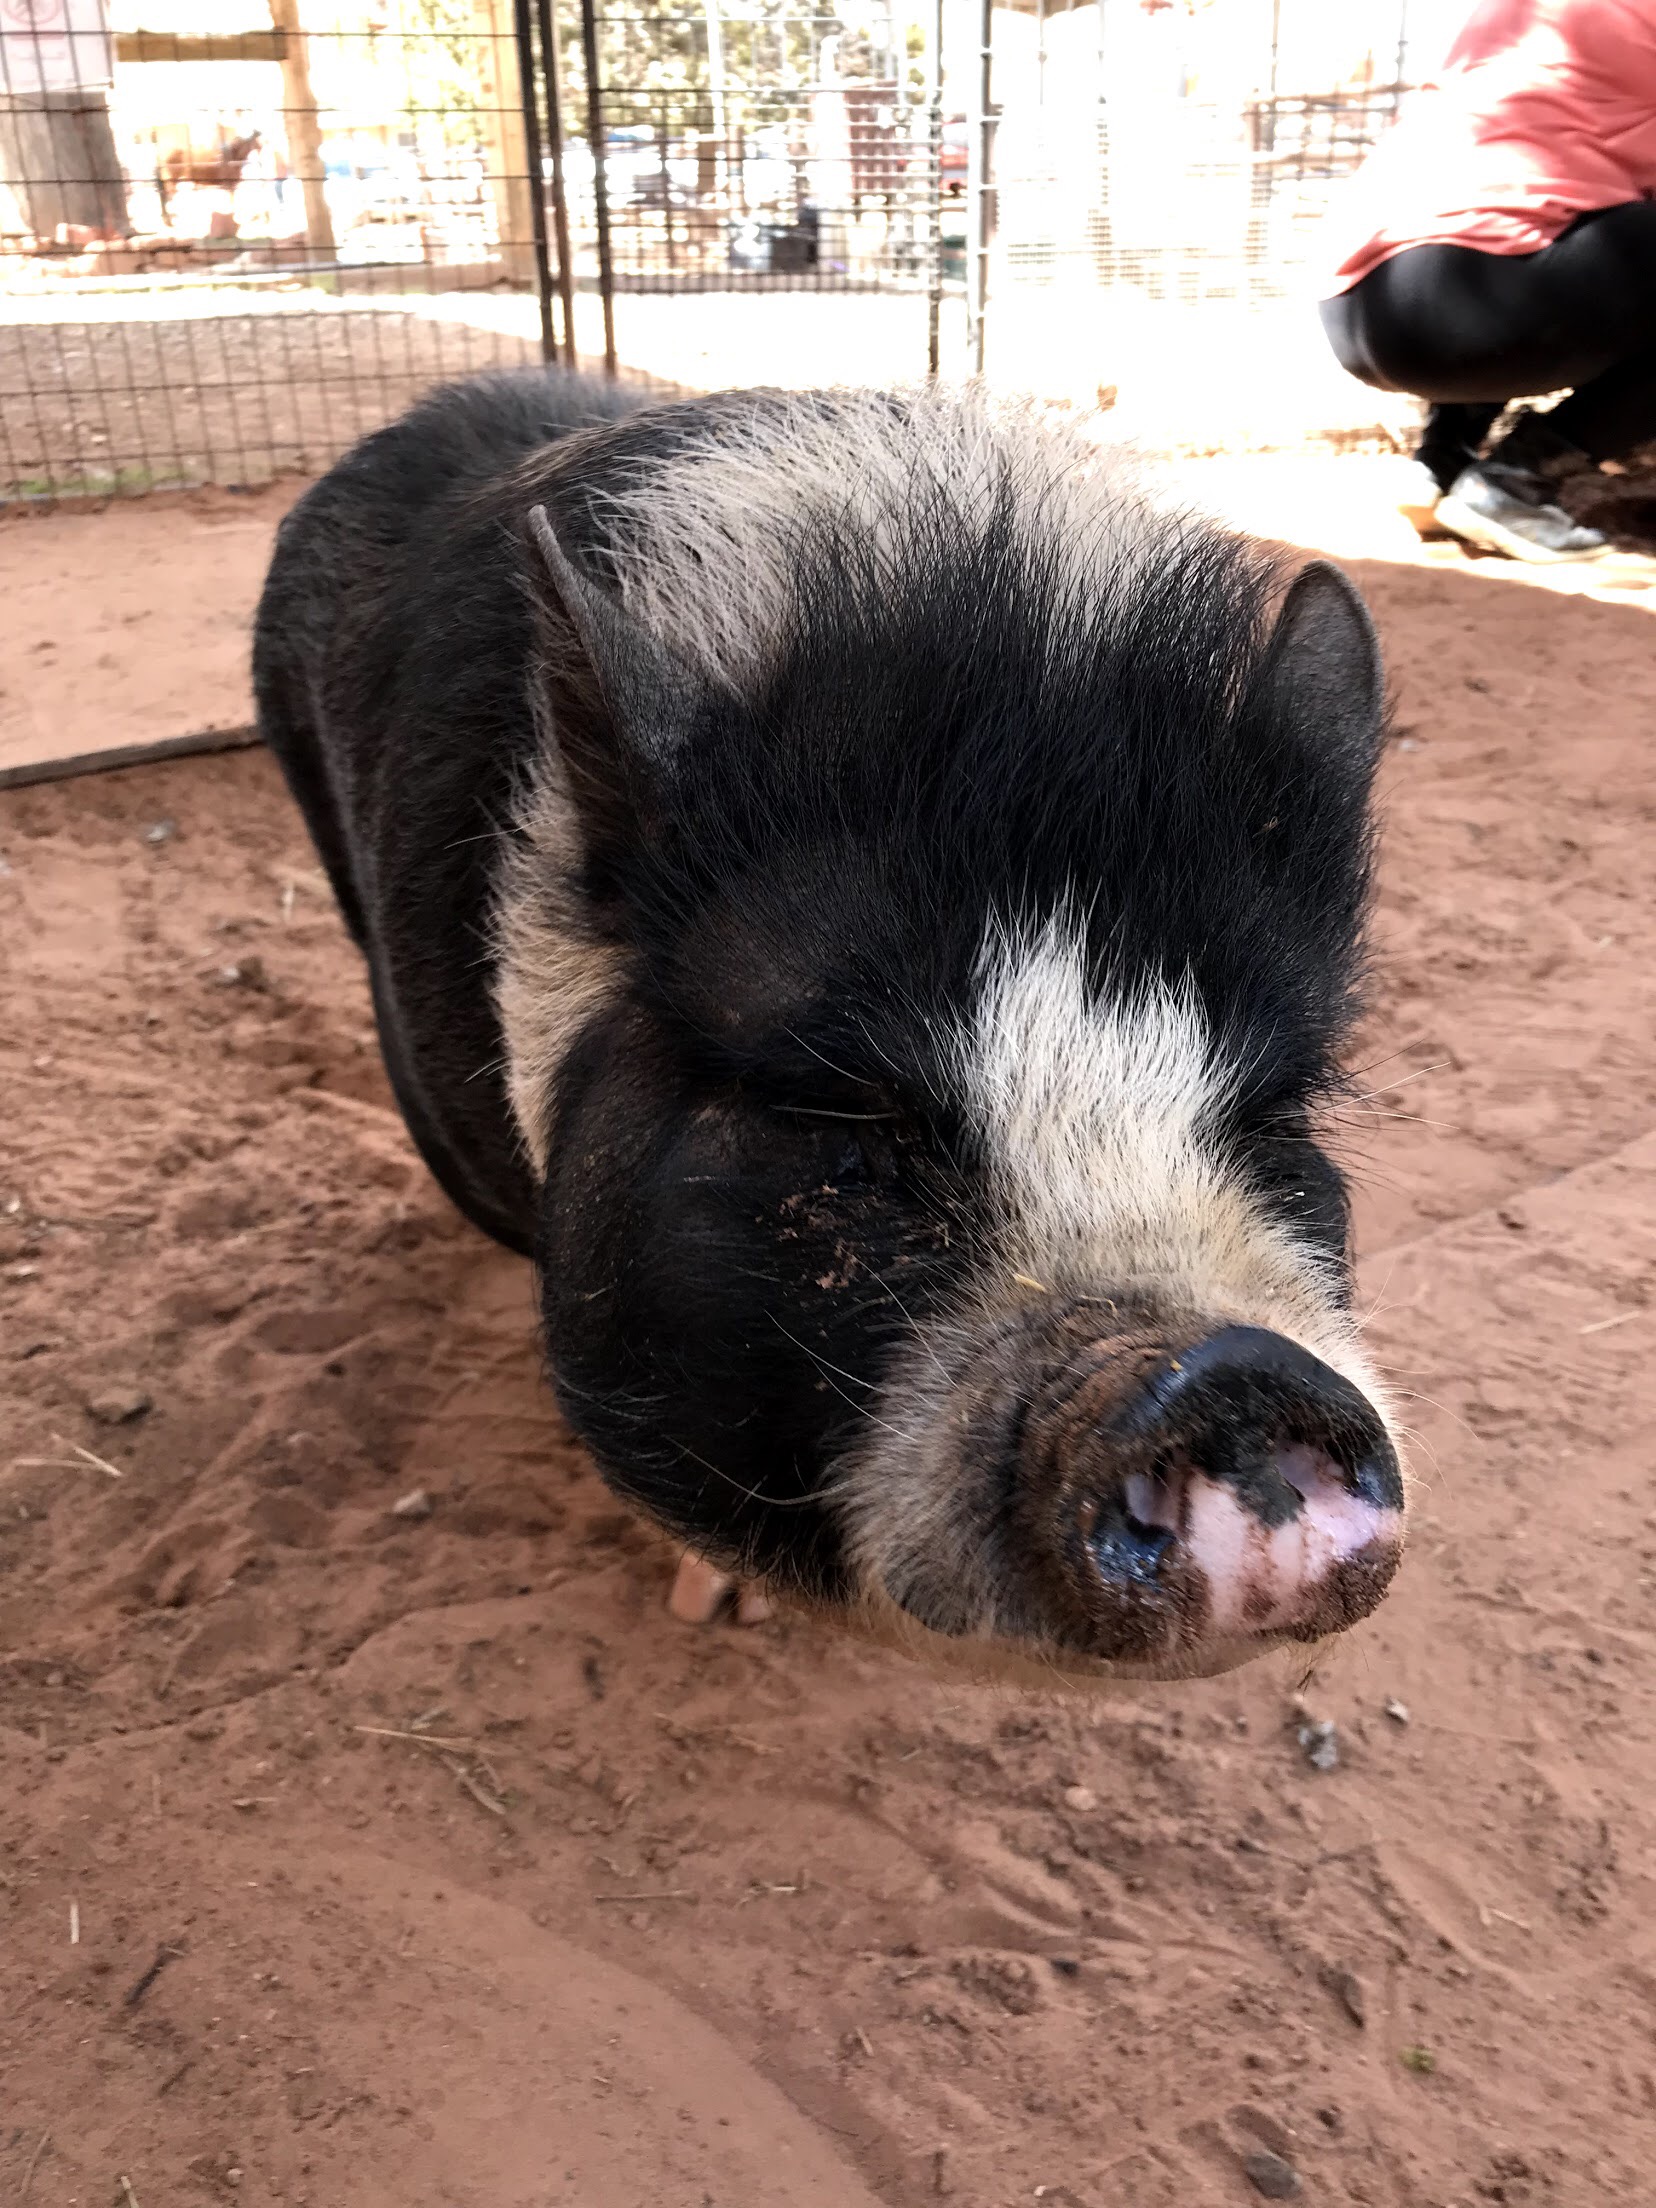 Pig at the Best Friends Animal Sanctuary